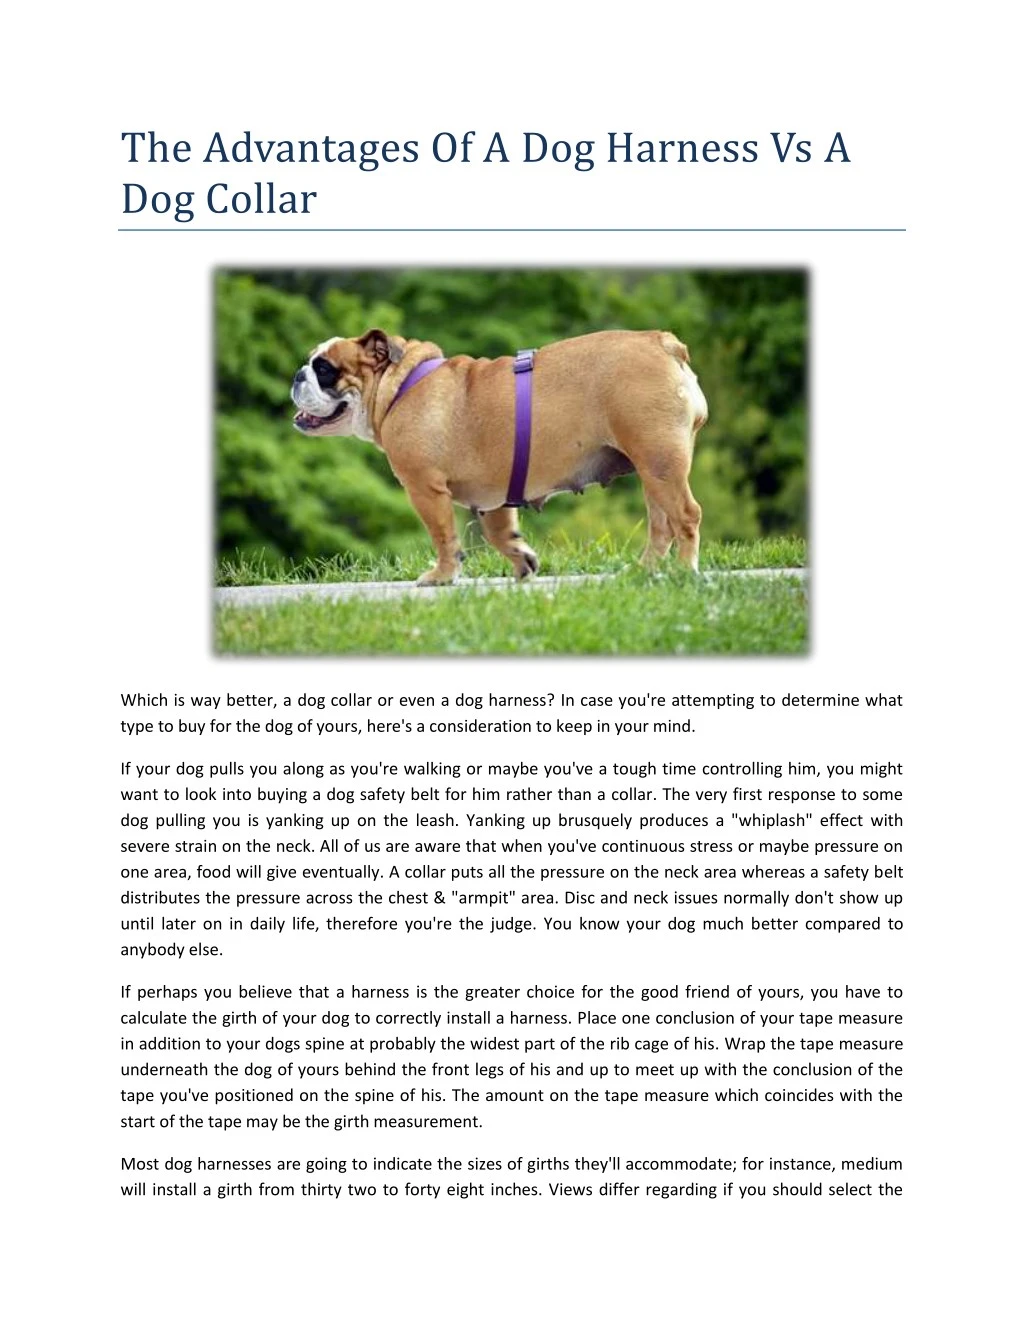 the advantages of a dog harness vs a dog collar